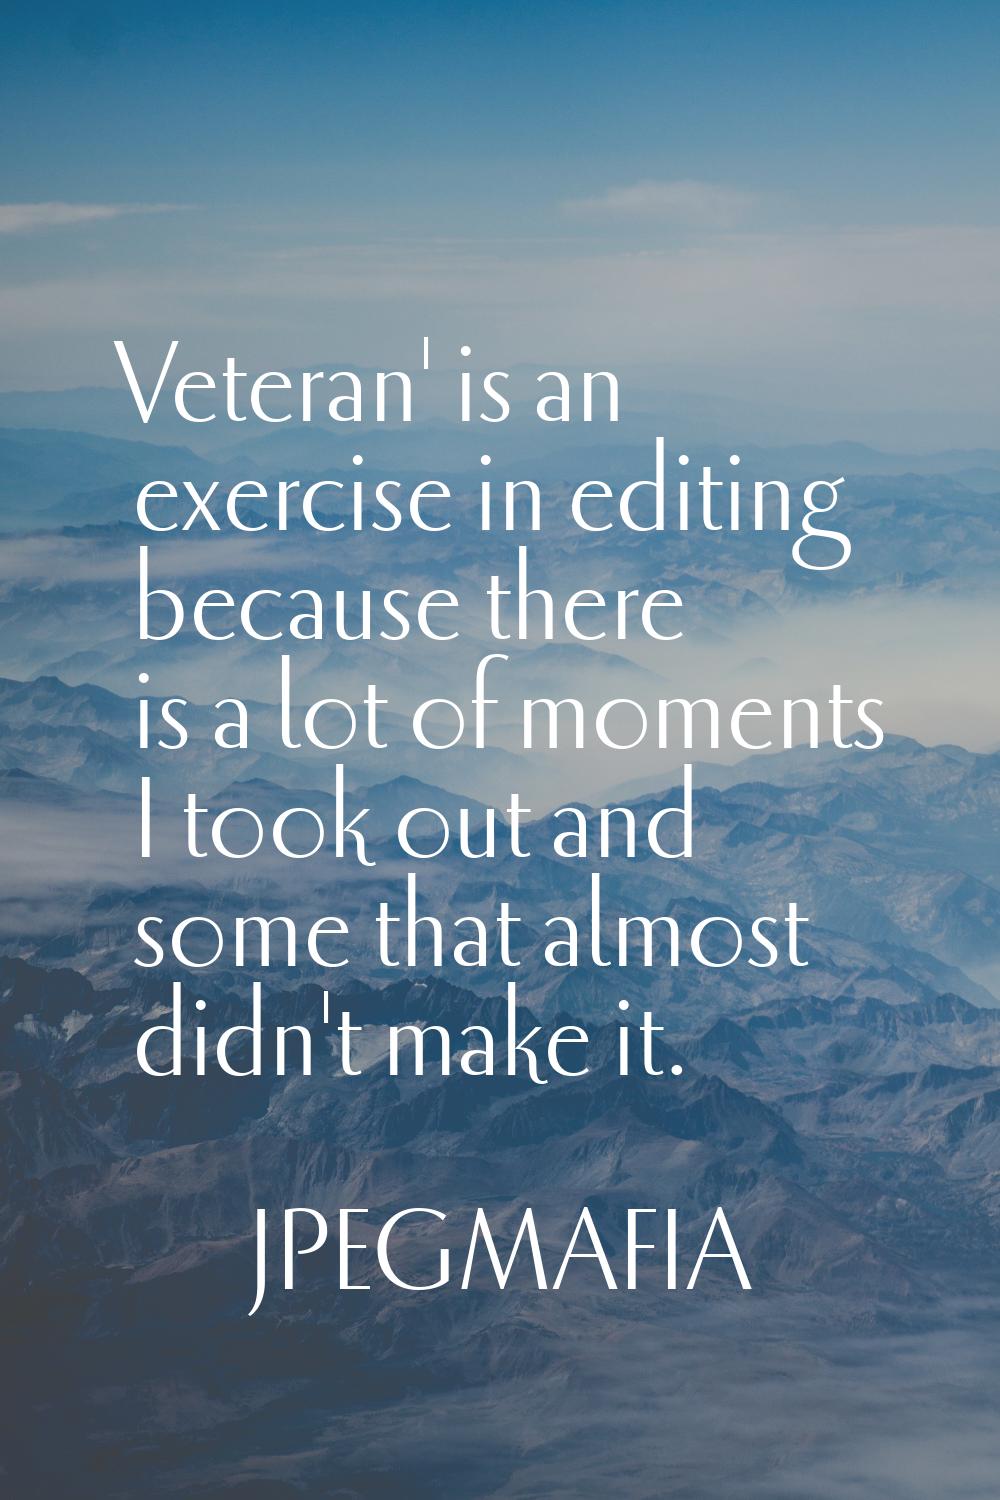 Veteran' is an exercise in editing because there is a lot of moments I took out and some that almos